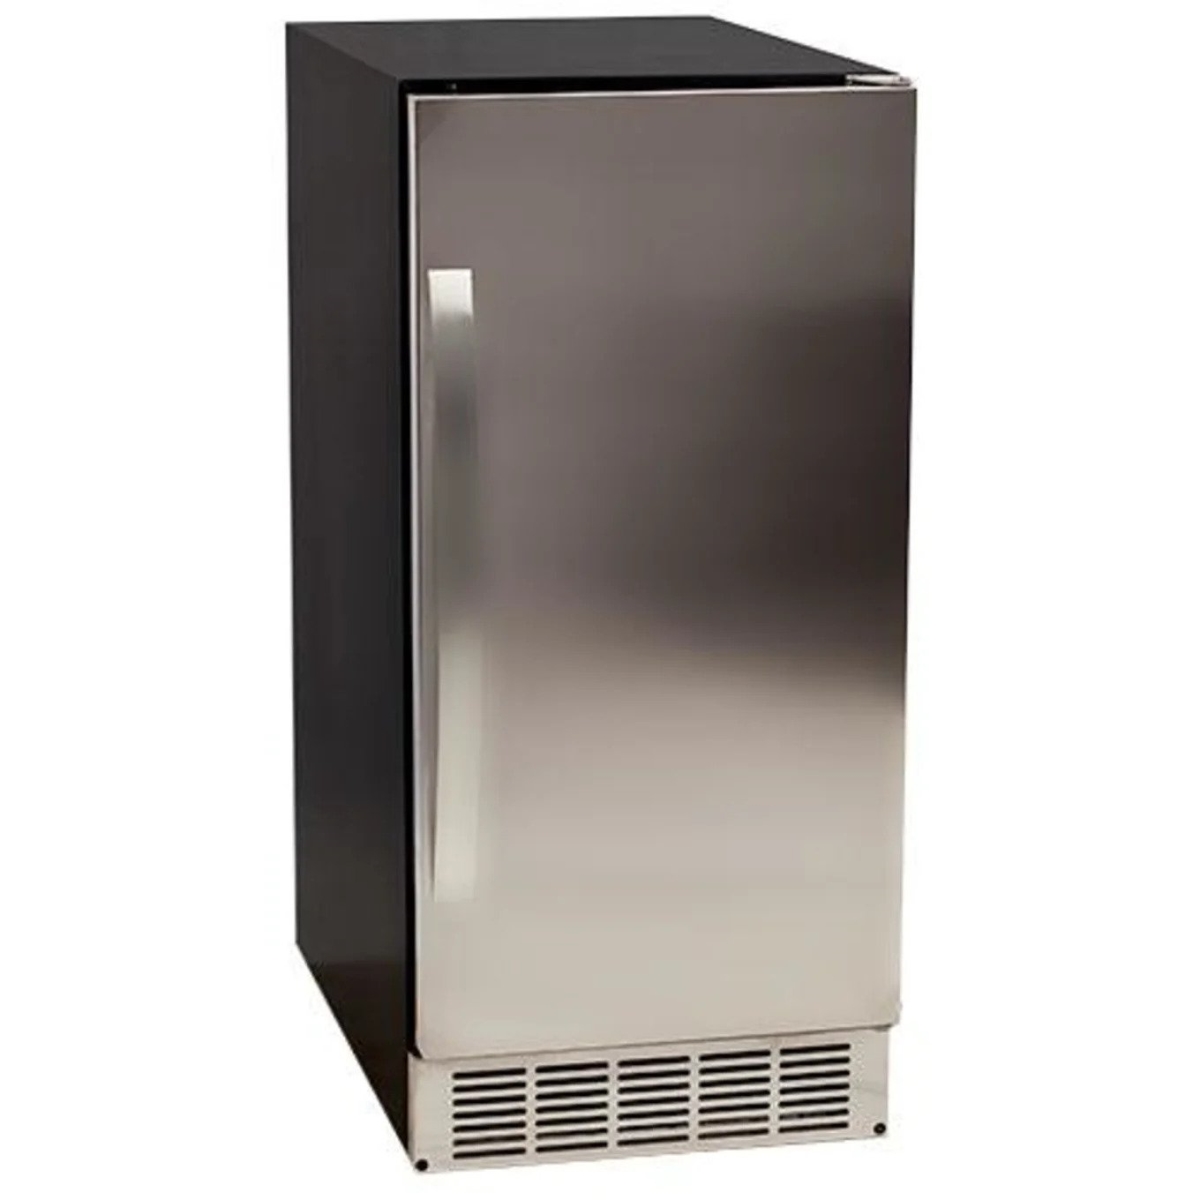 Picture of EdgeStar IB450SSP 50 lbs UC-FS Undercounter Clear Ice Maker, Stainless Steel